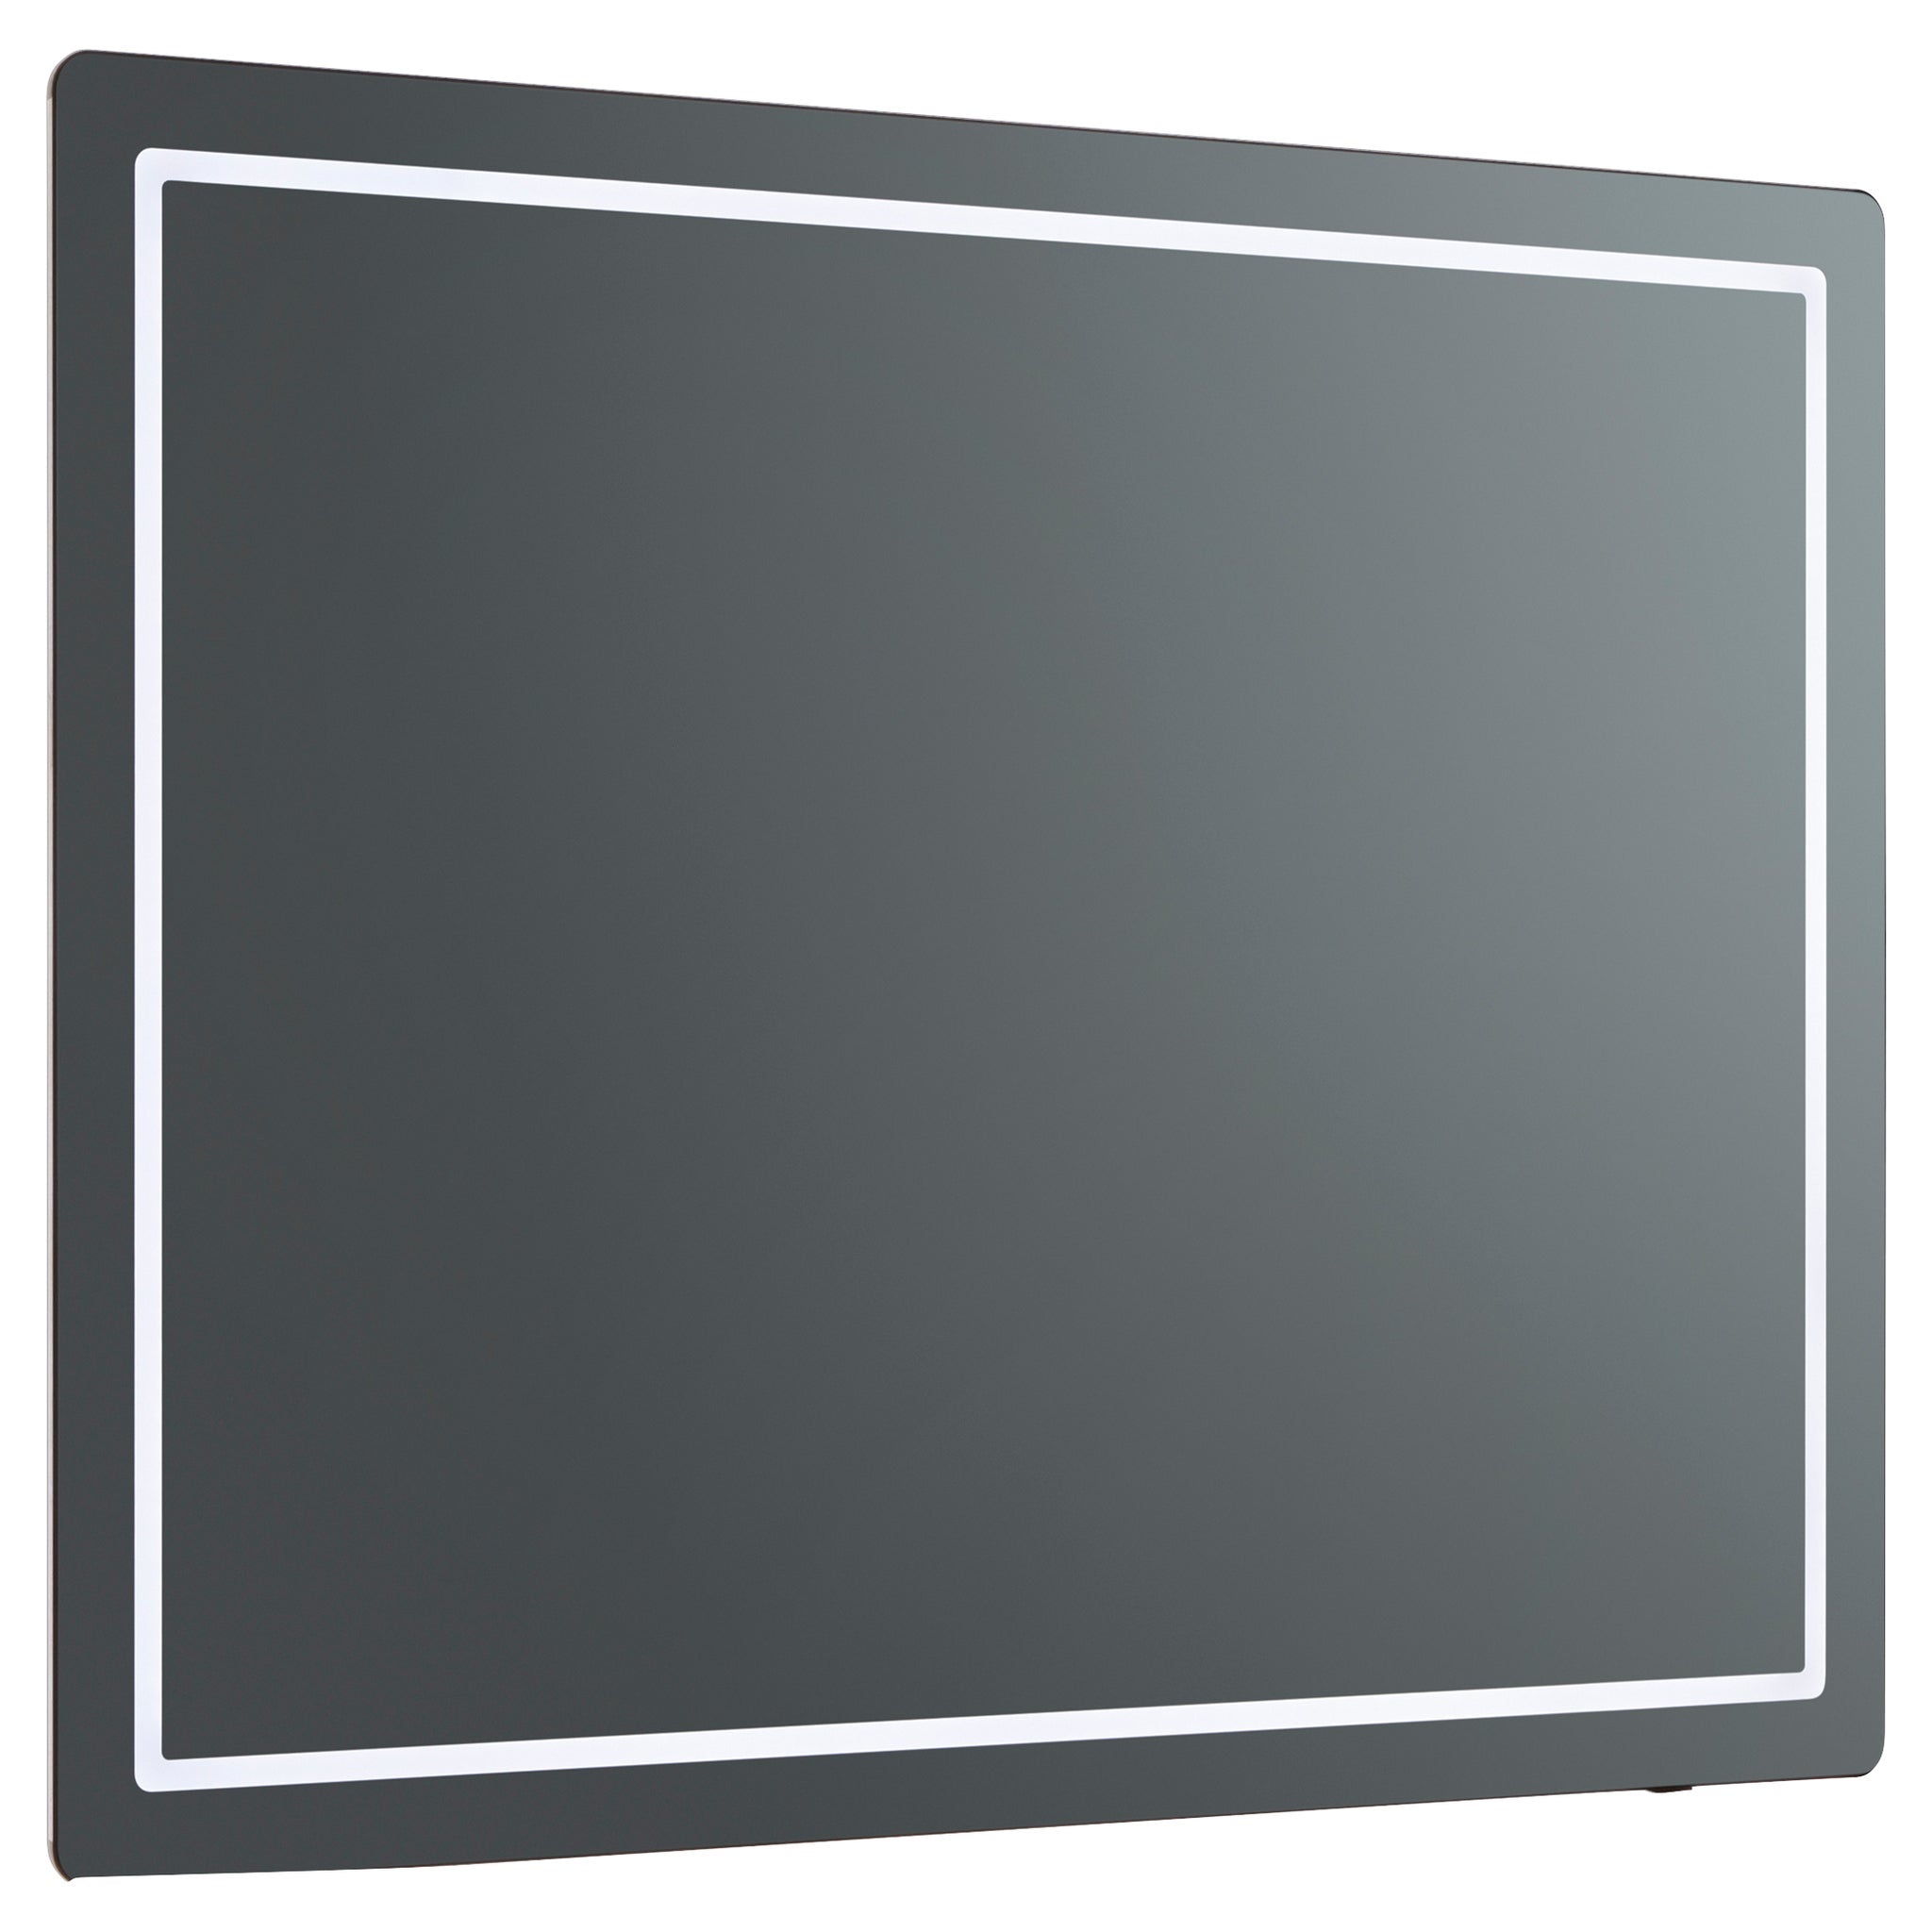 Oxygen COMPACT 3-0404-15 LED Lighted Mirror 48x48 Inch - Black